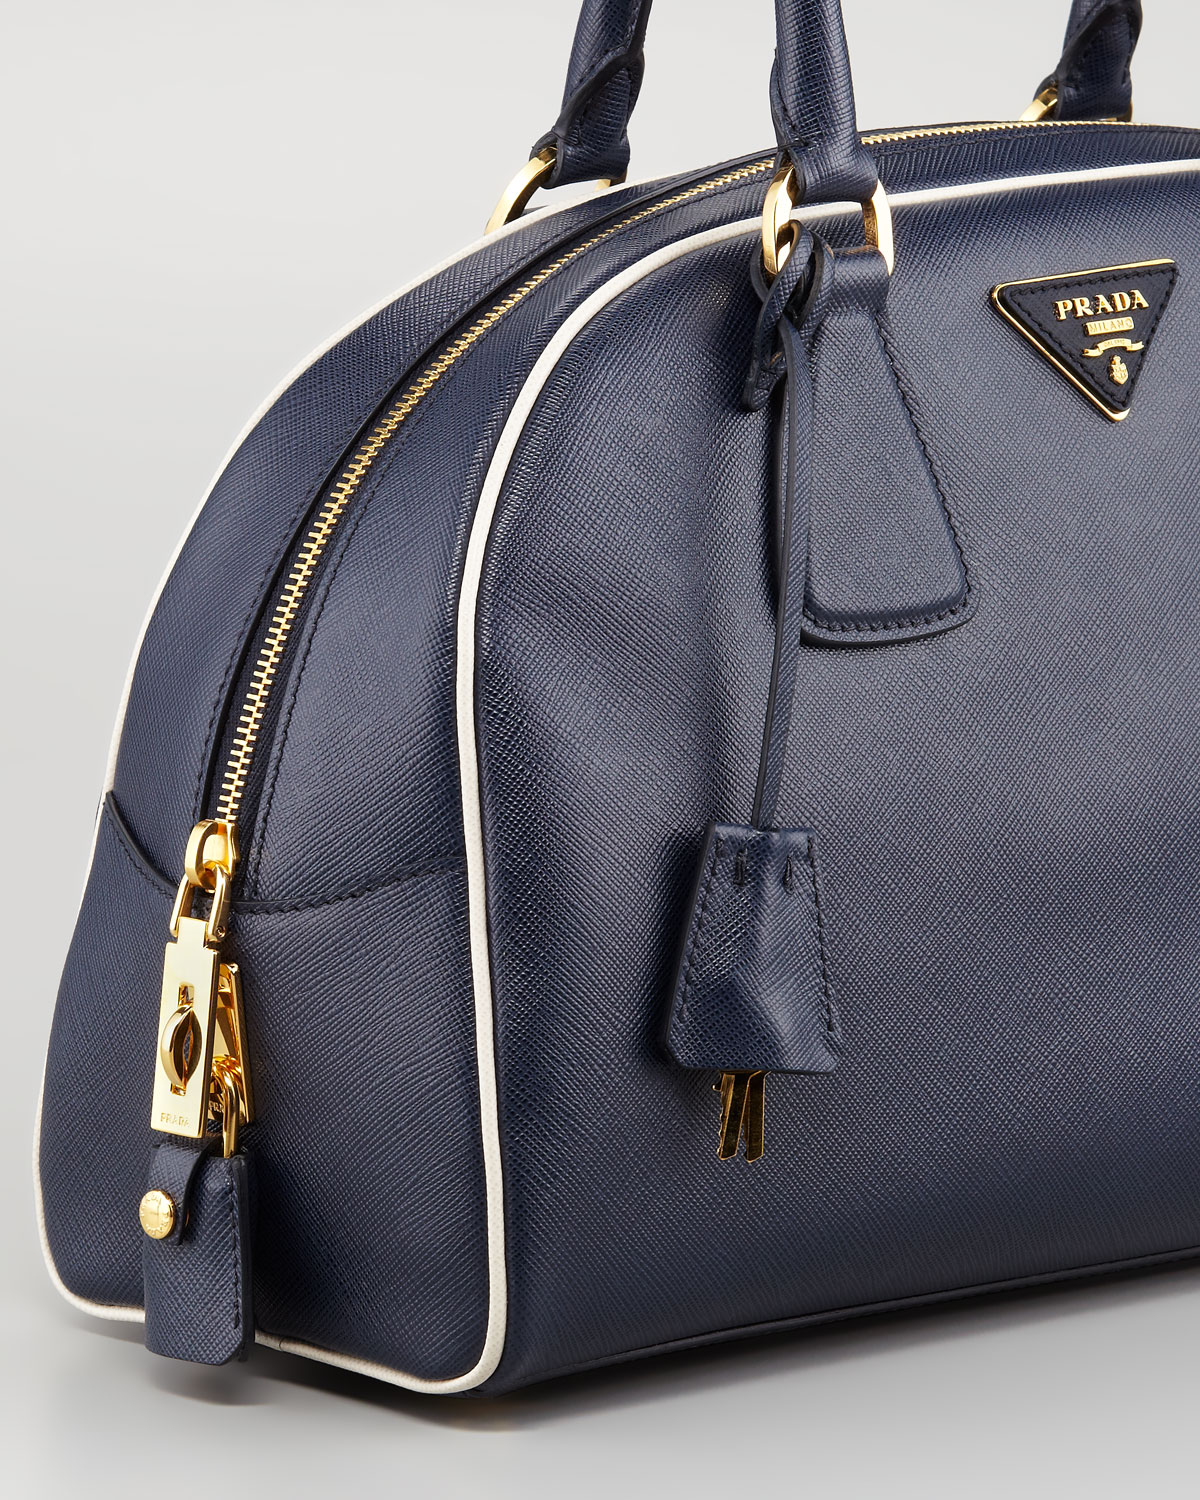 Prada Medium Doublehandle Dome Tote Bag in Blue (navy/white) | Lyst